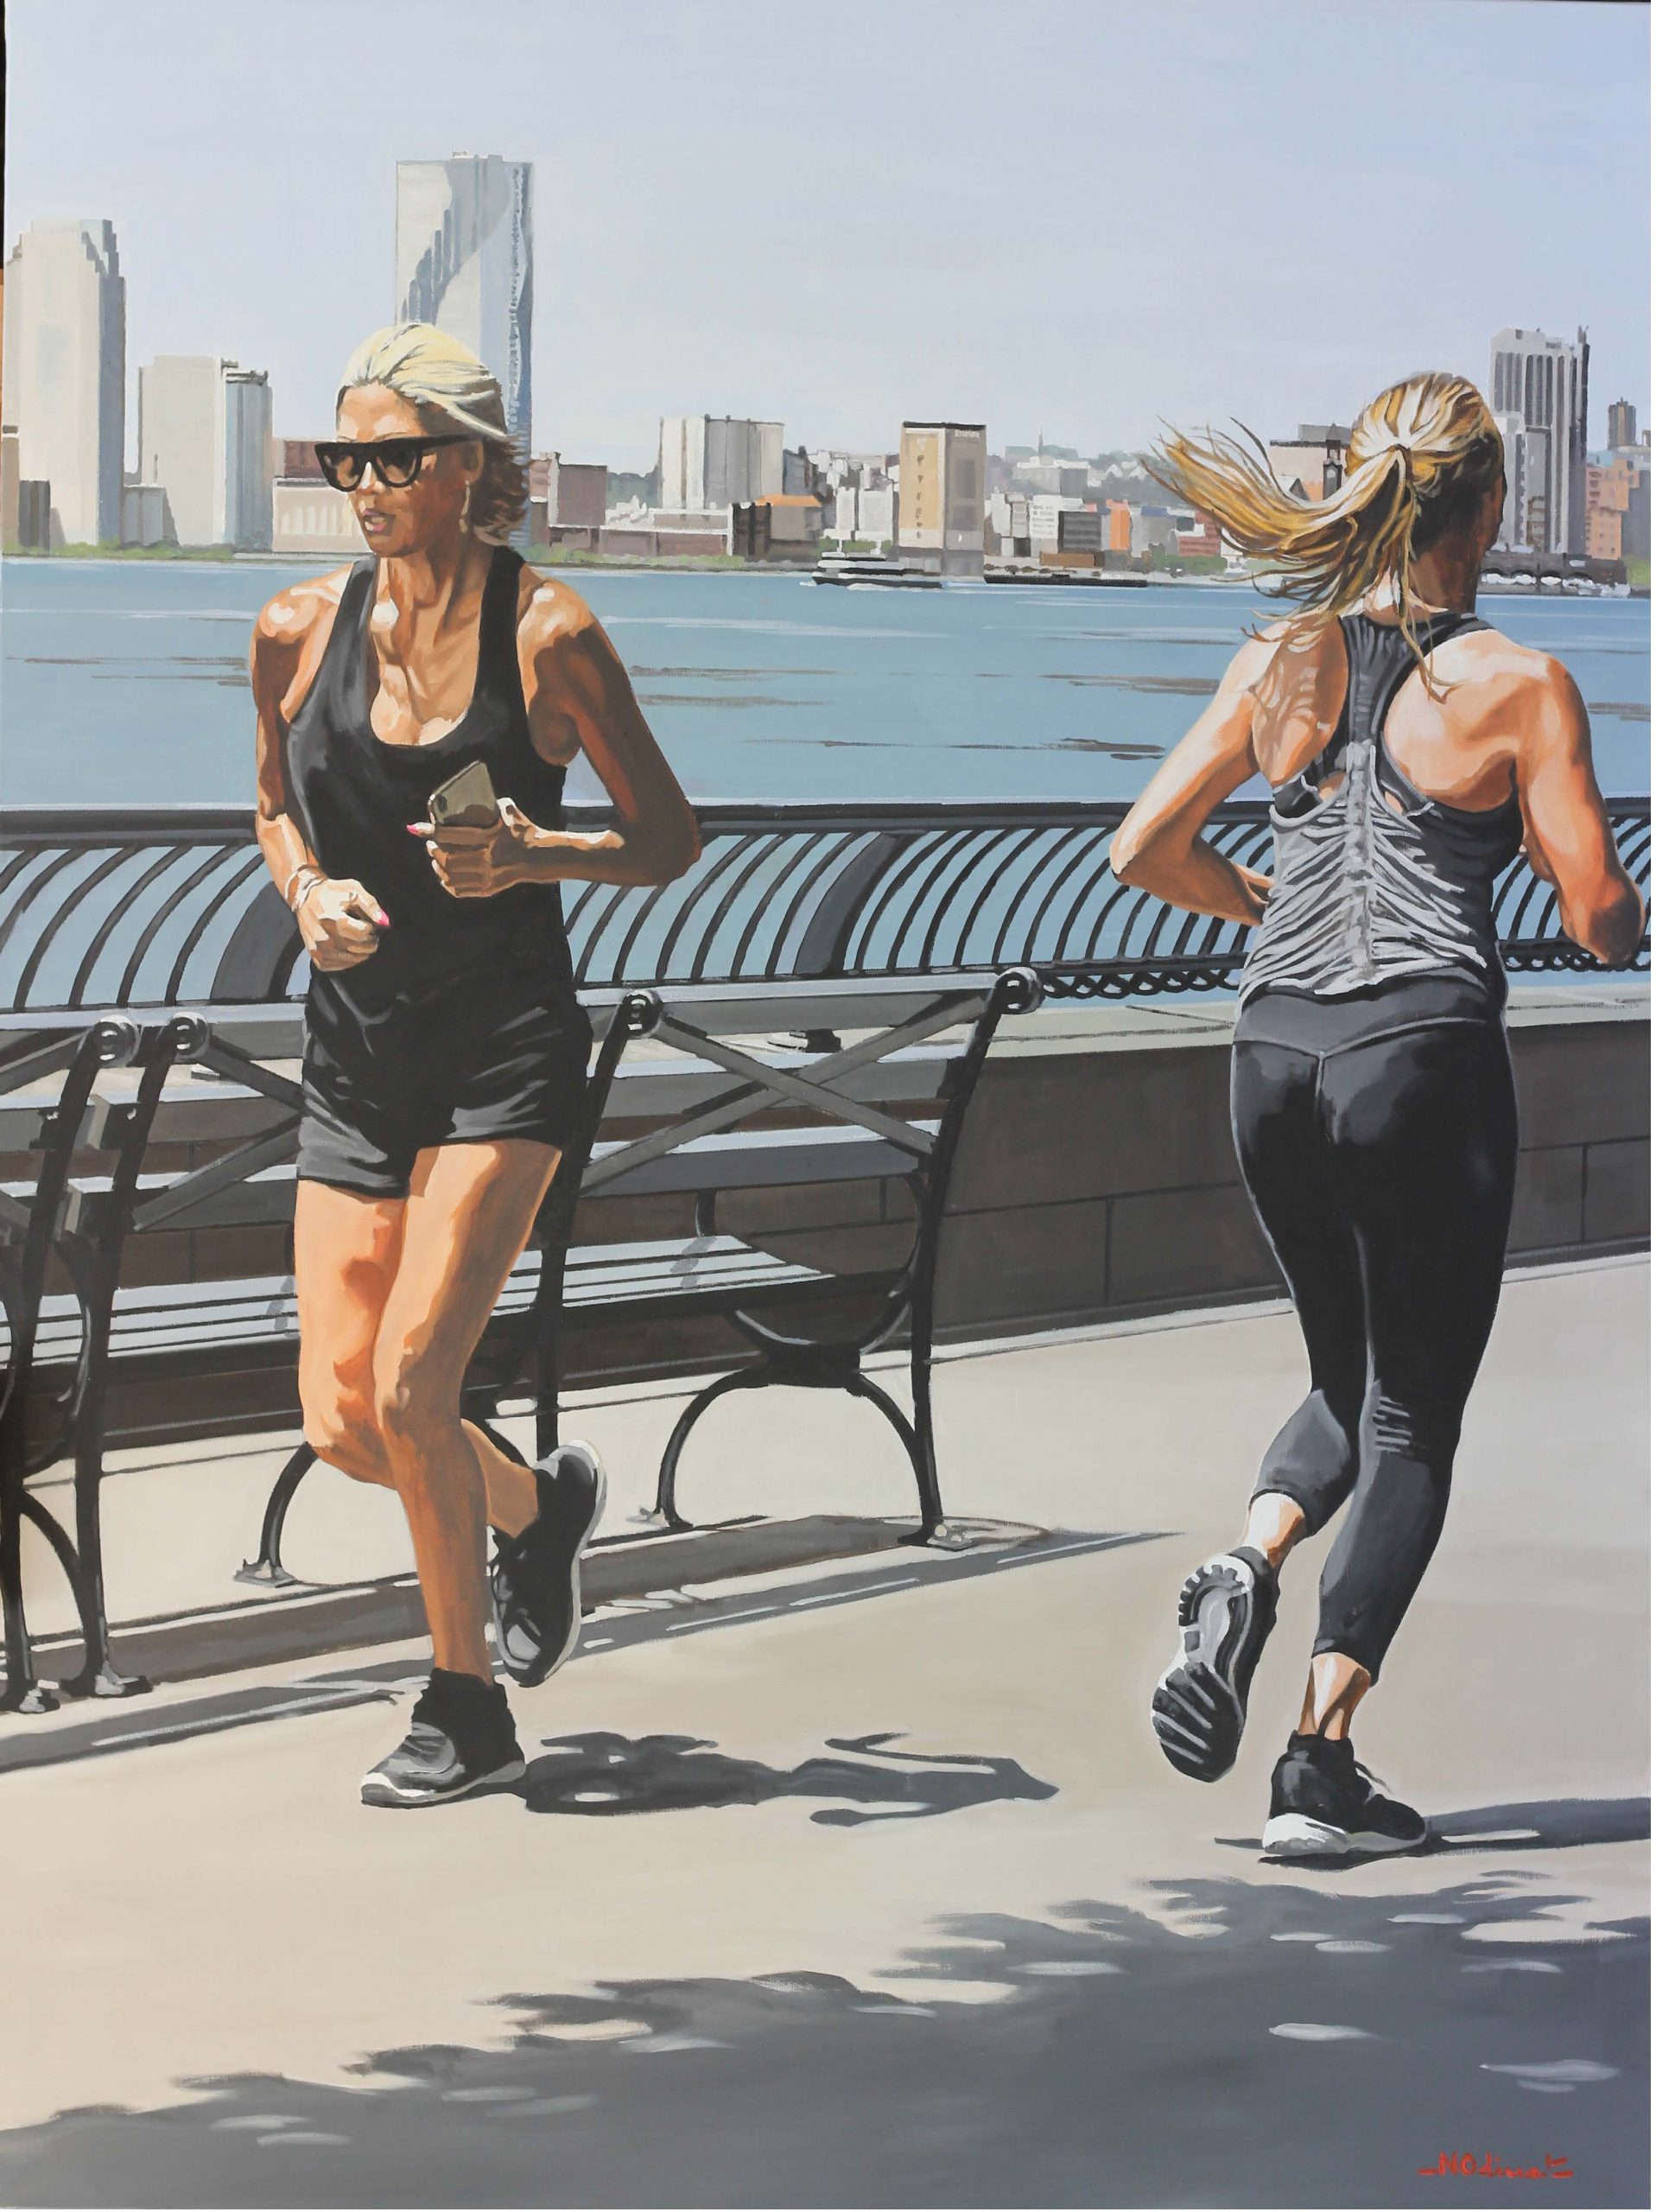 Nicolas Odinet artiste  Sport Illustrated in Battery Park © Marciano Contemporary